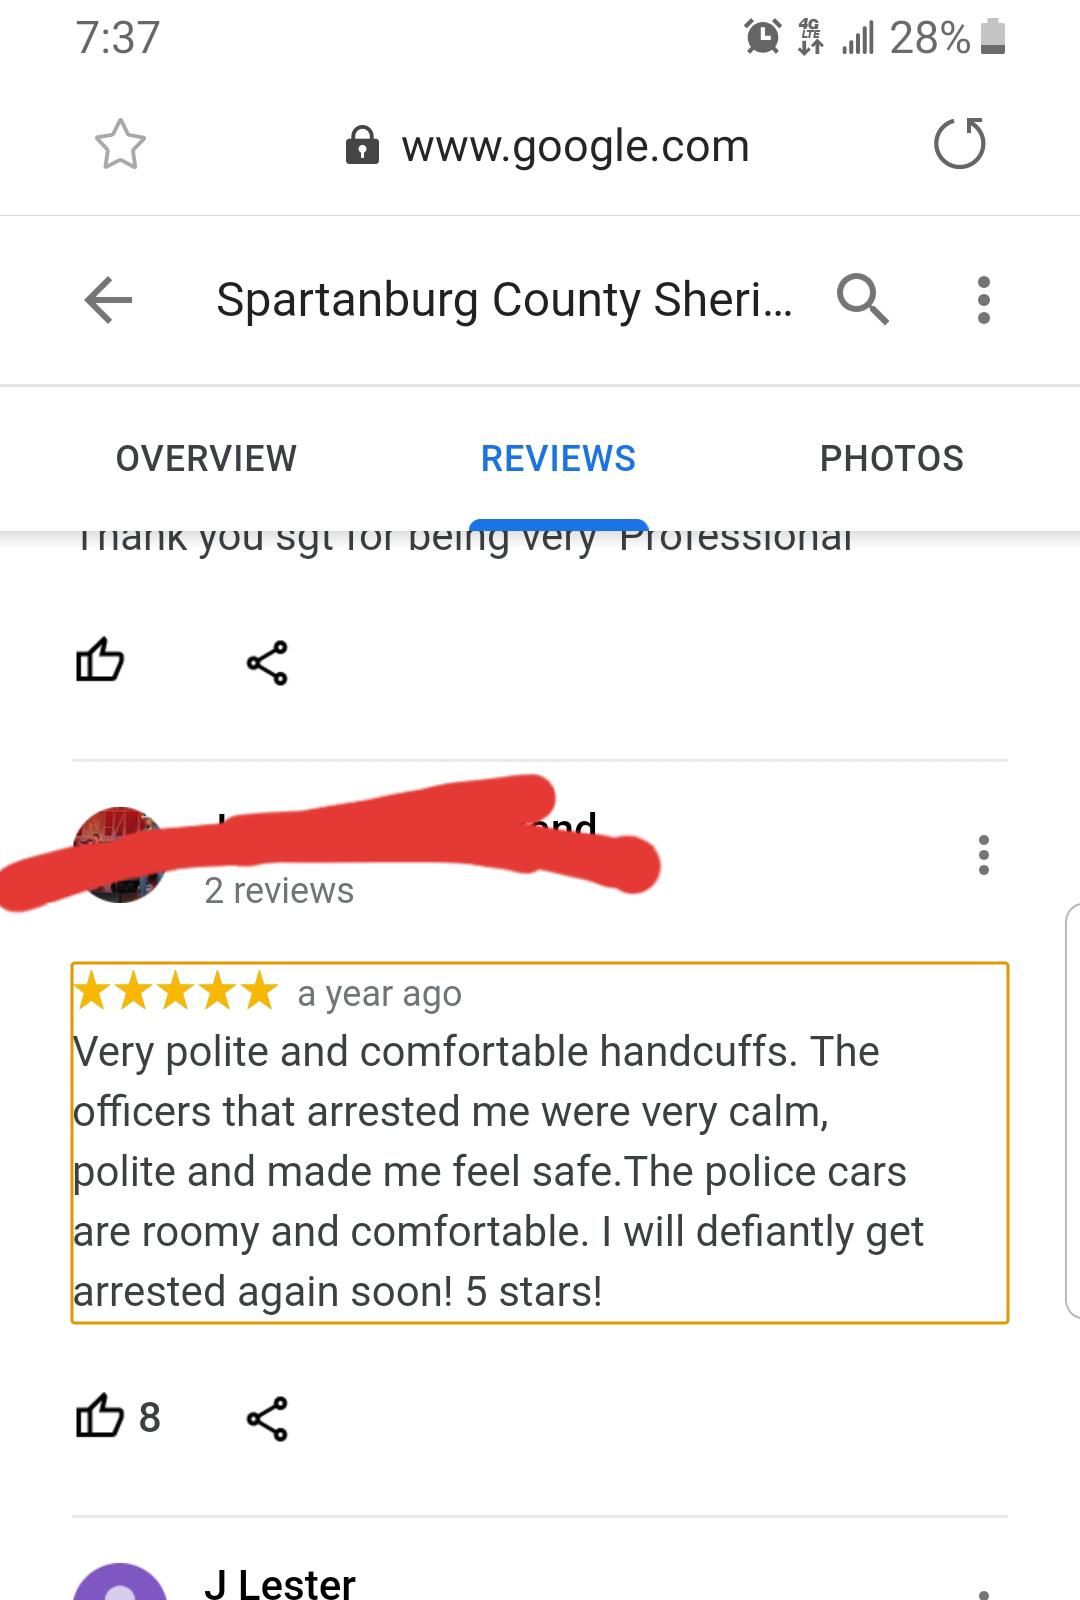 Experienced jailbird gives sheriff's department 5 star review on Google with his full name and photo included.